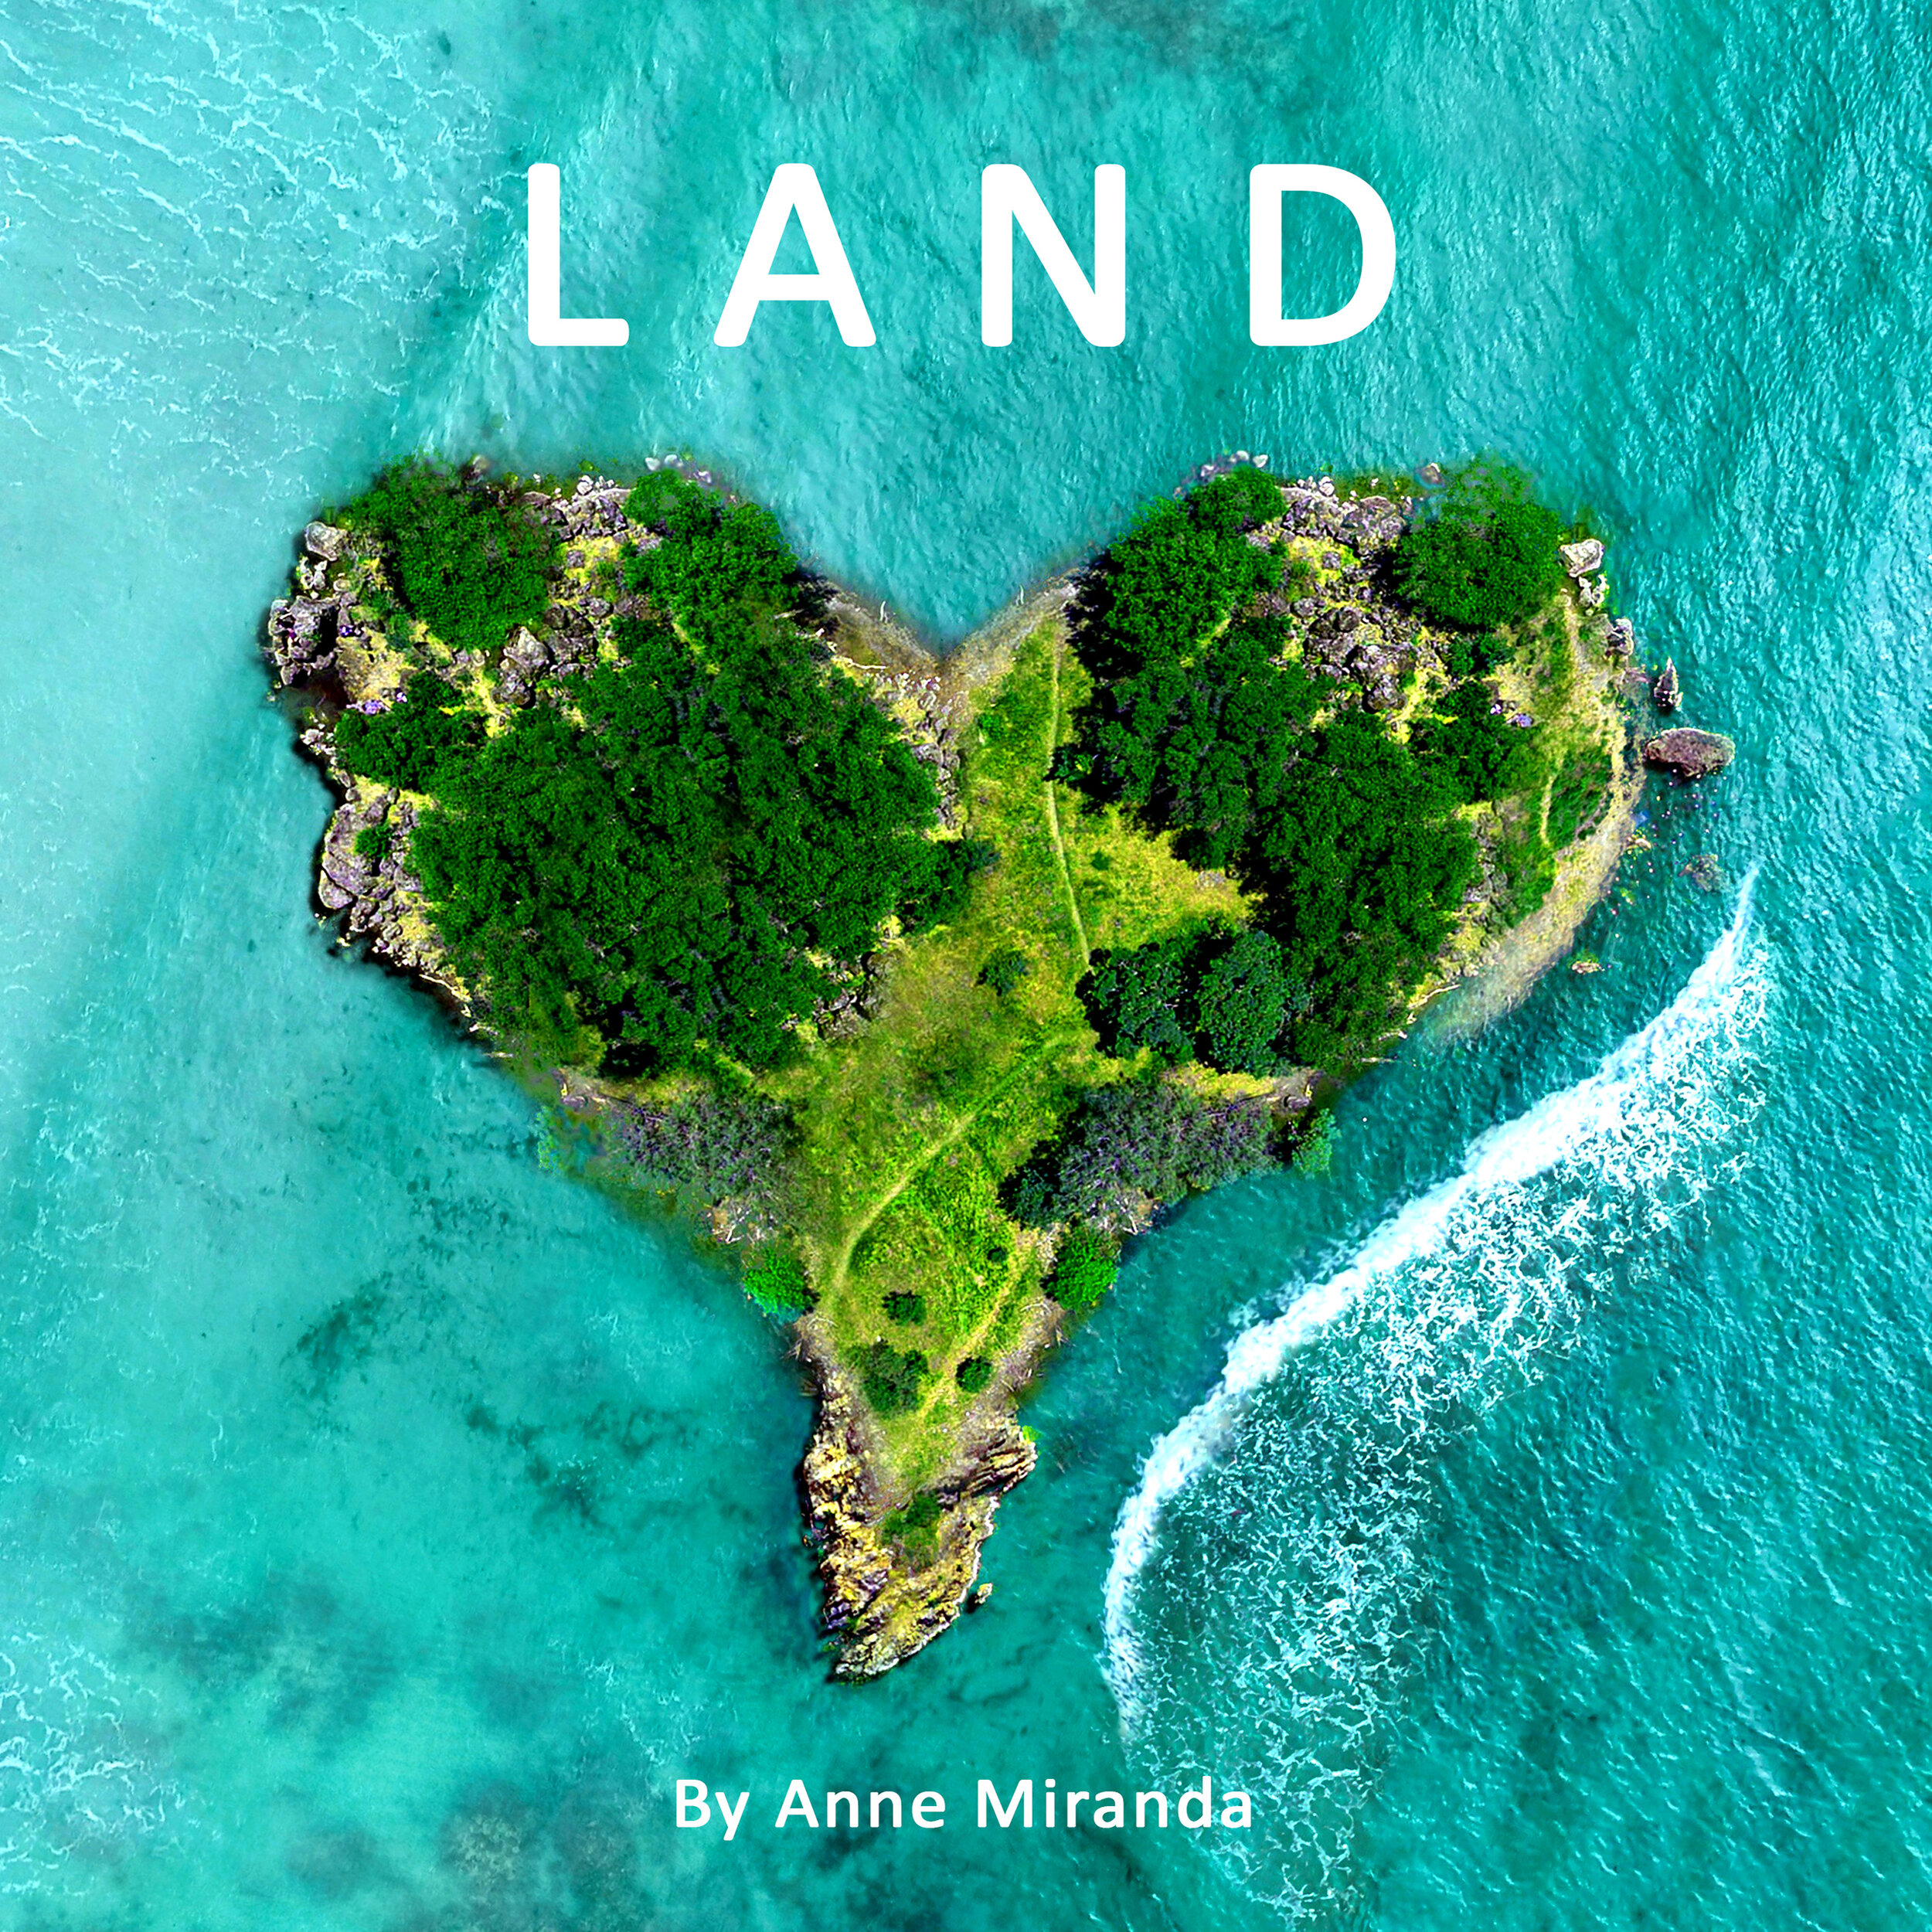 Land illustrated with photographs